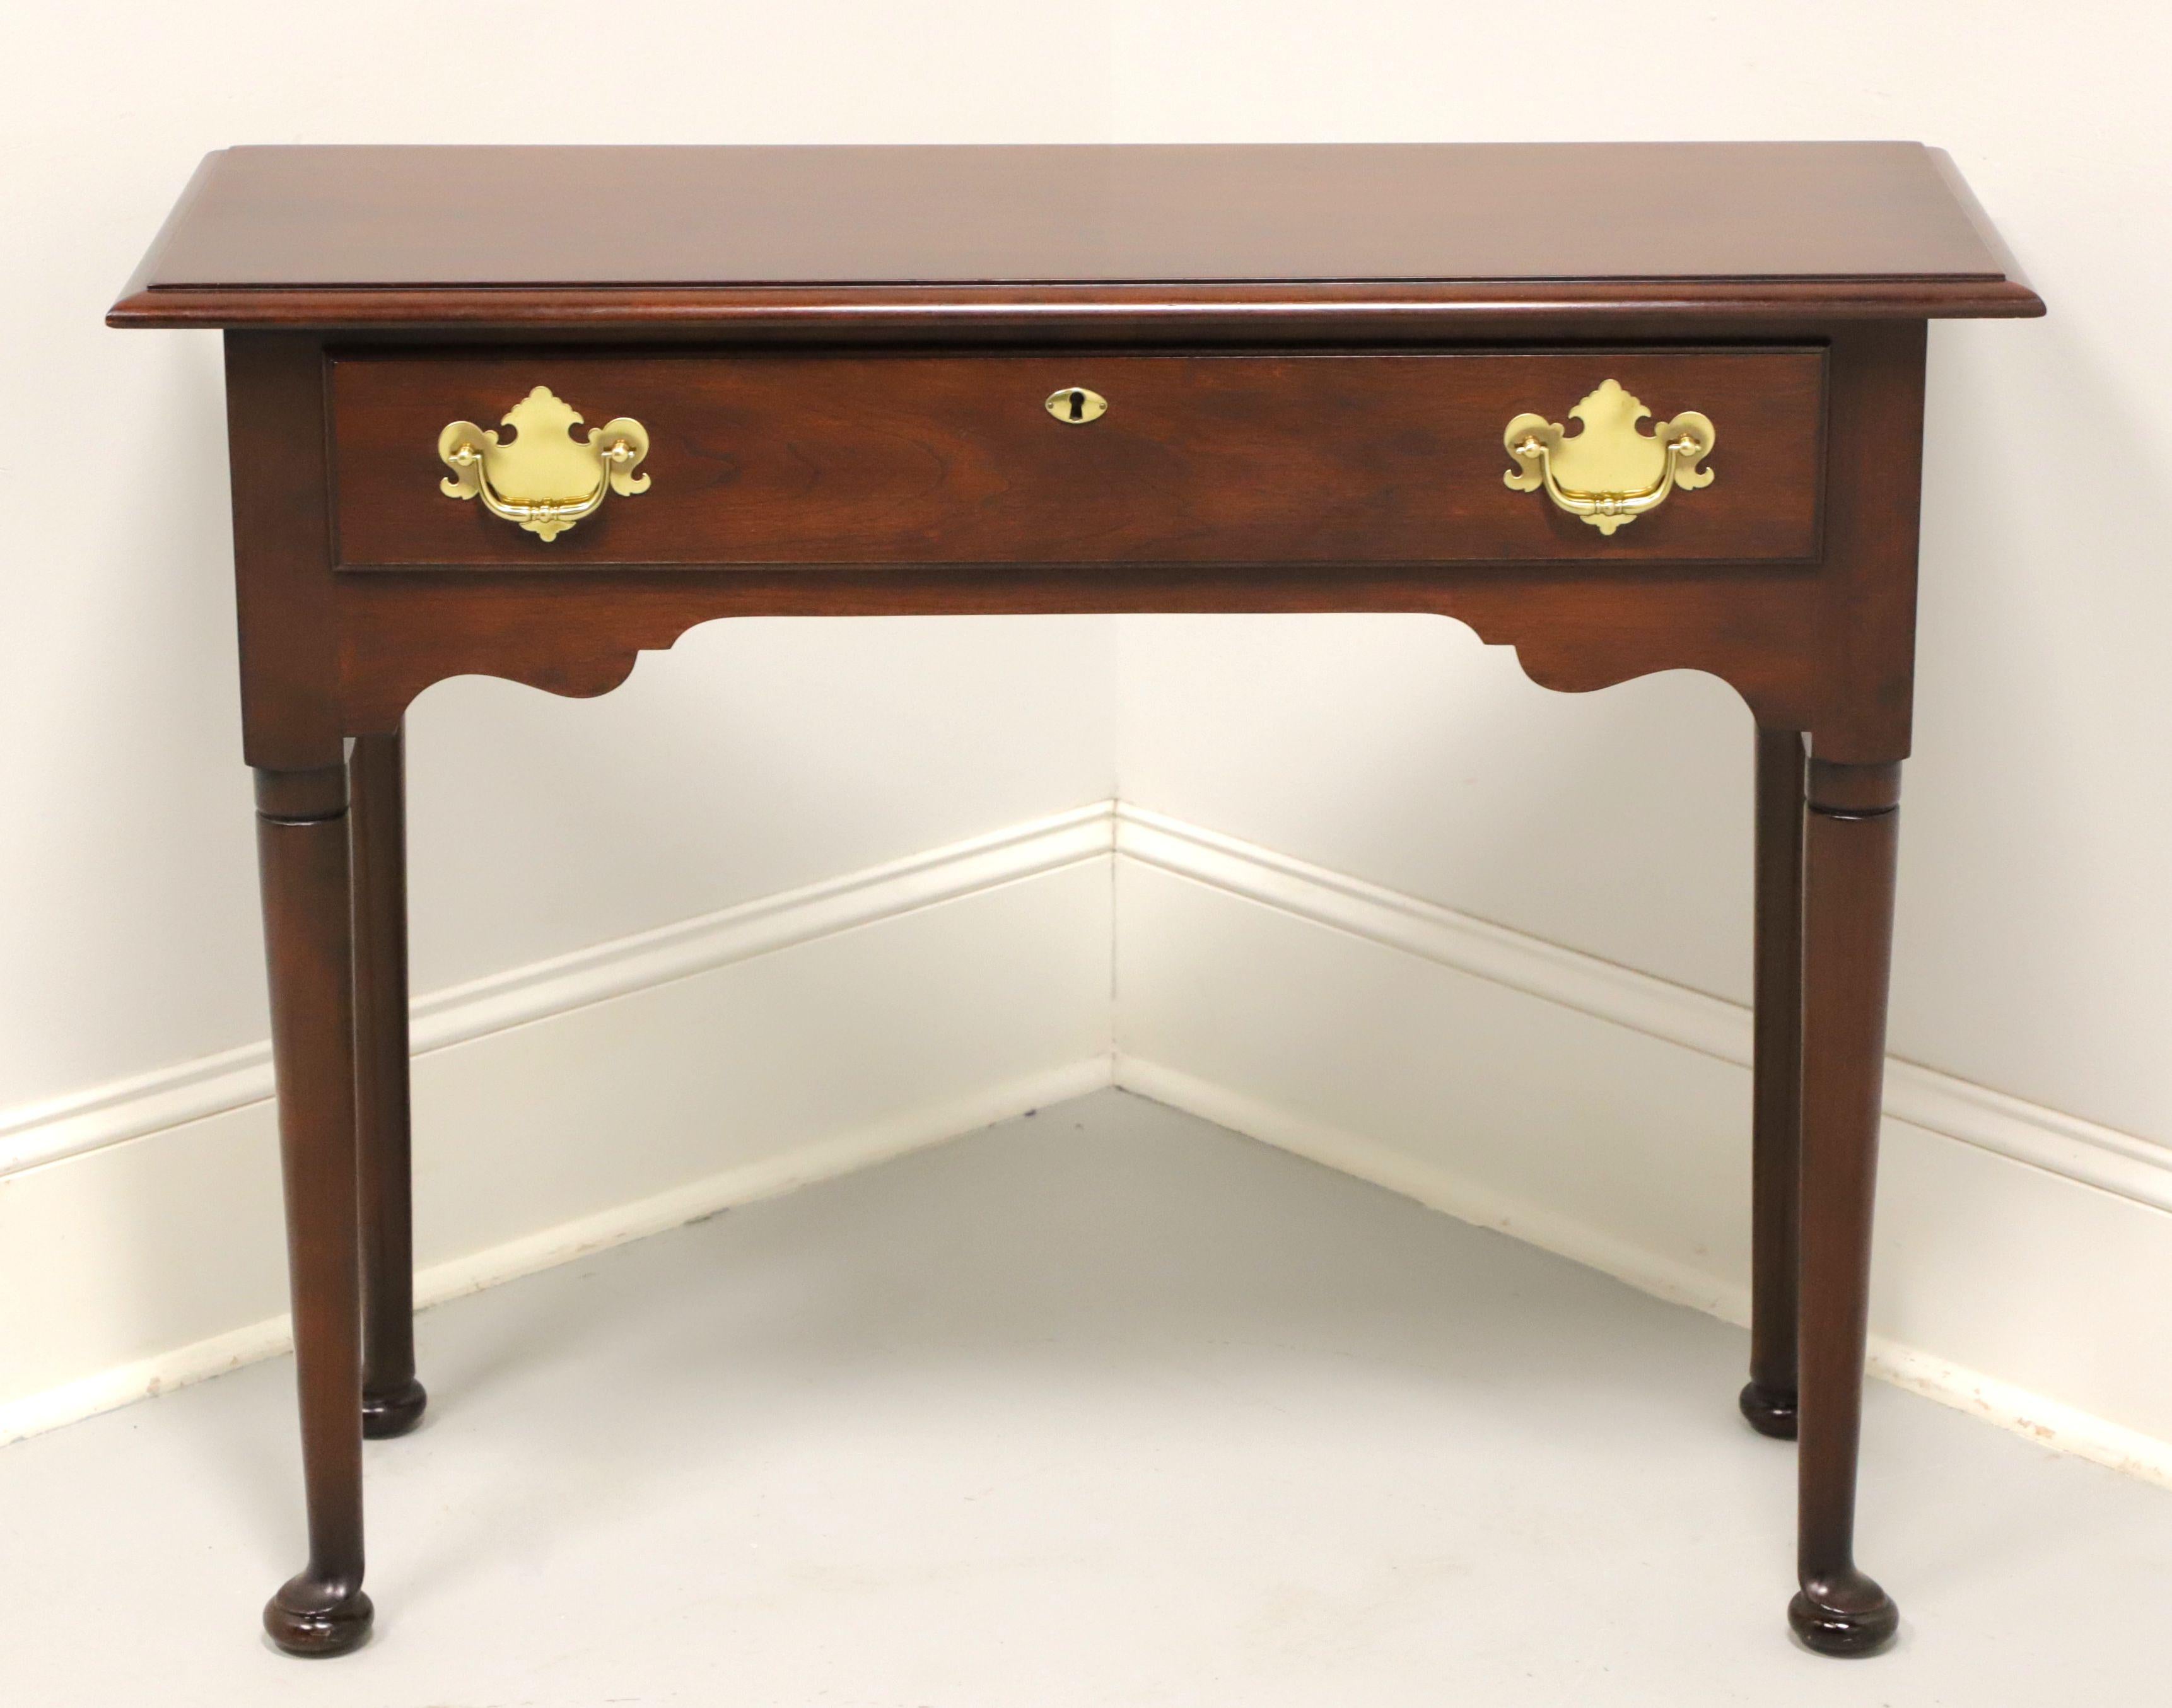 A Georgian style diminutive console table by Statton Furniture, from their Trutype line. Solid cherry wood with their Oldtowne finish, brass hardware, bevel edge top, carved apron, tapered straight legs and pad feet. Features one drawer of dovetail